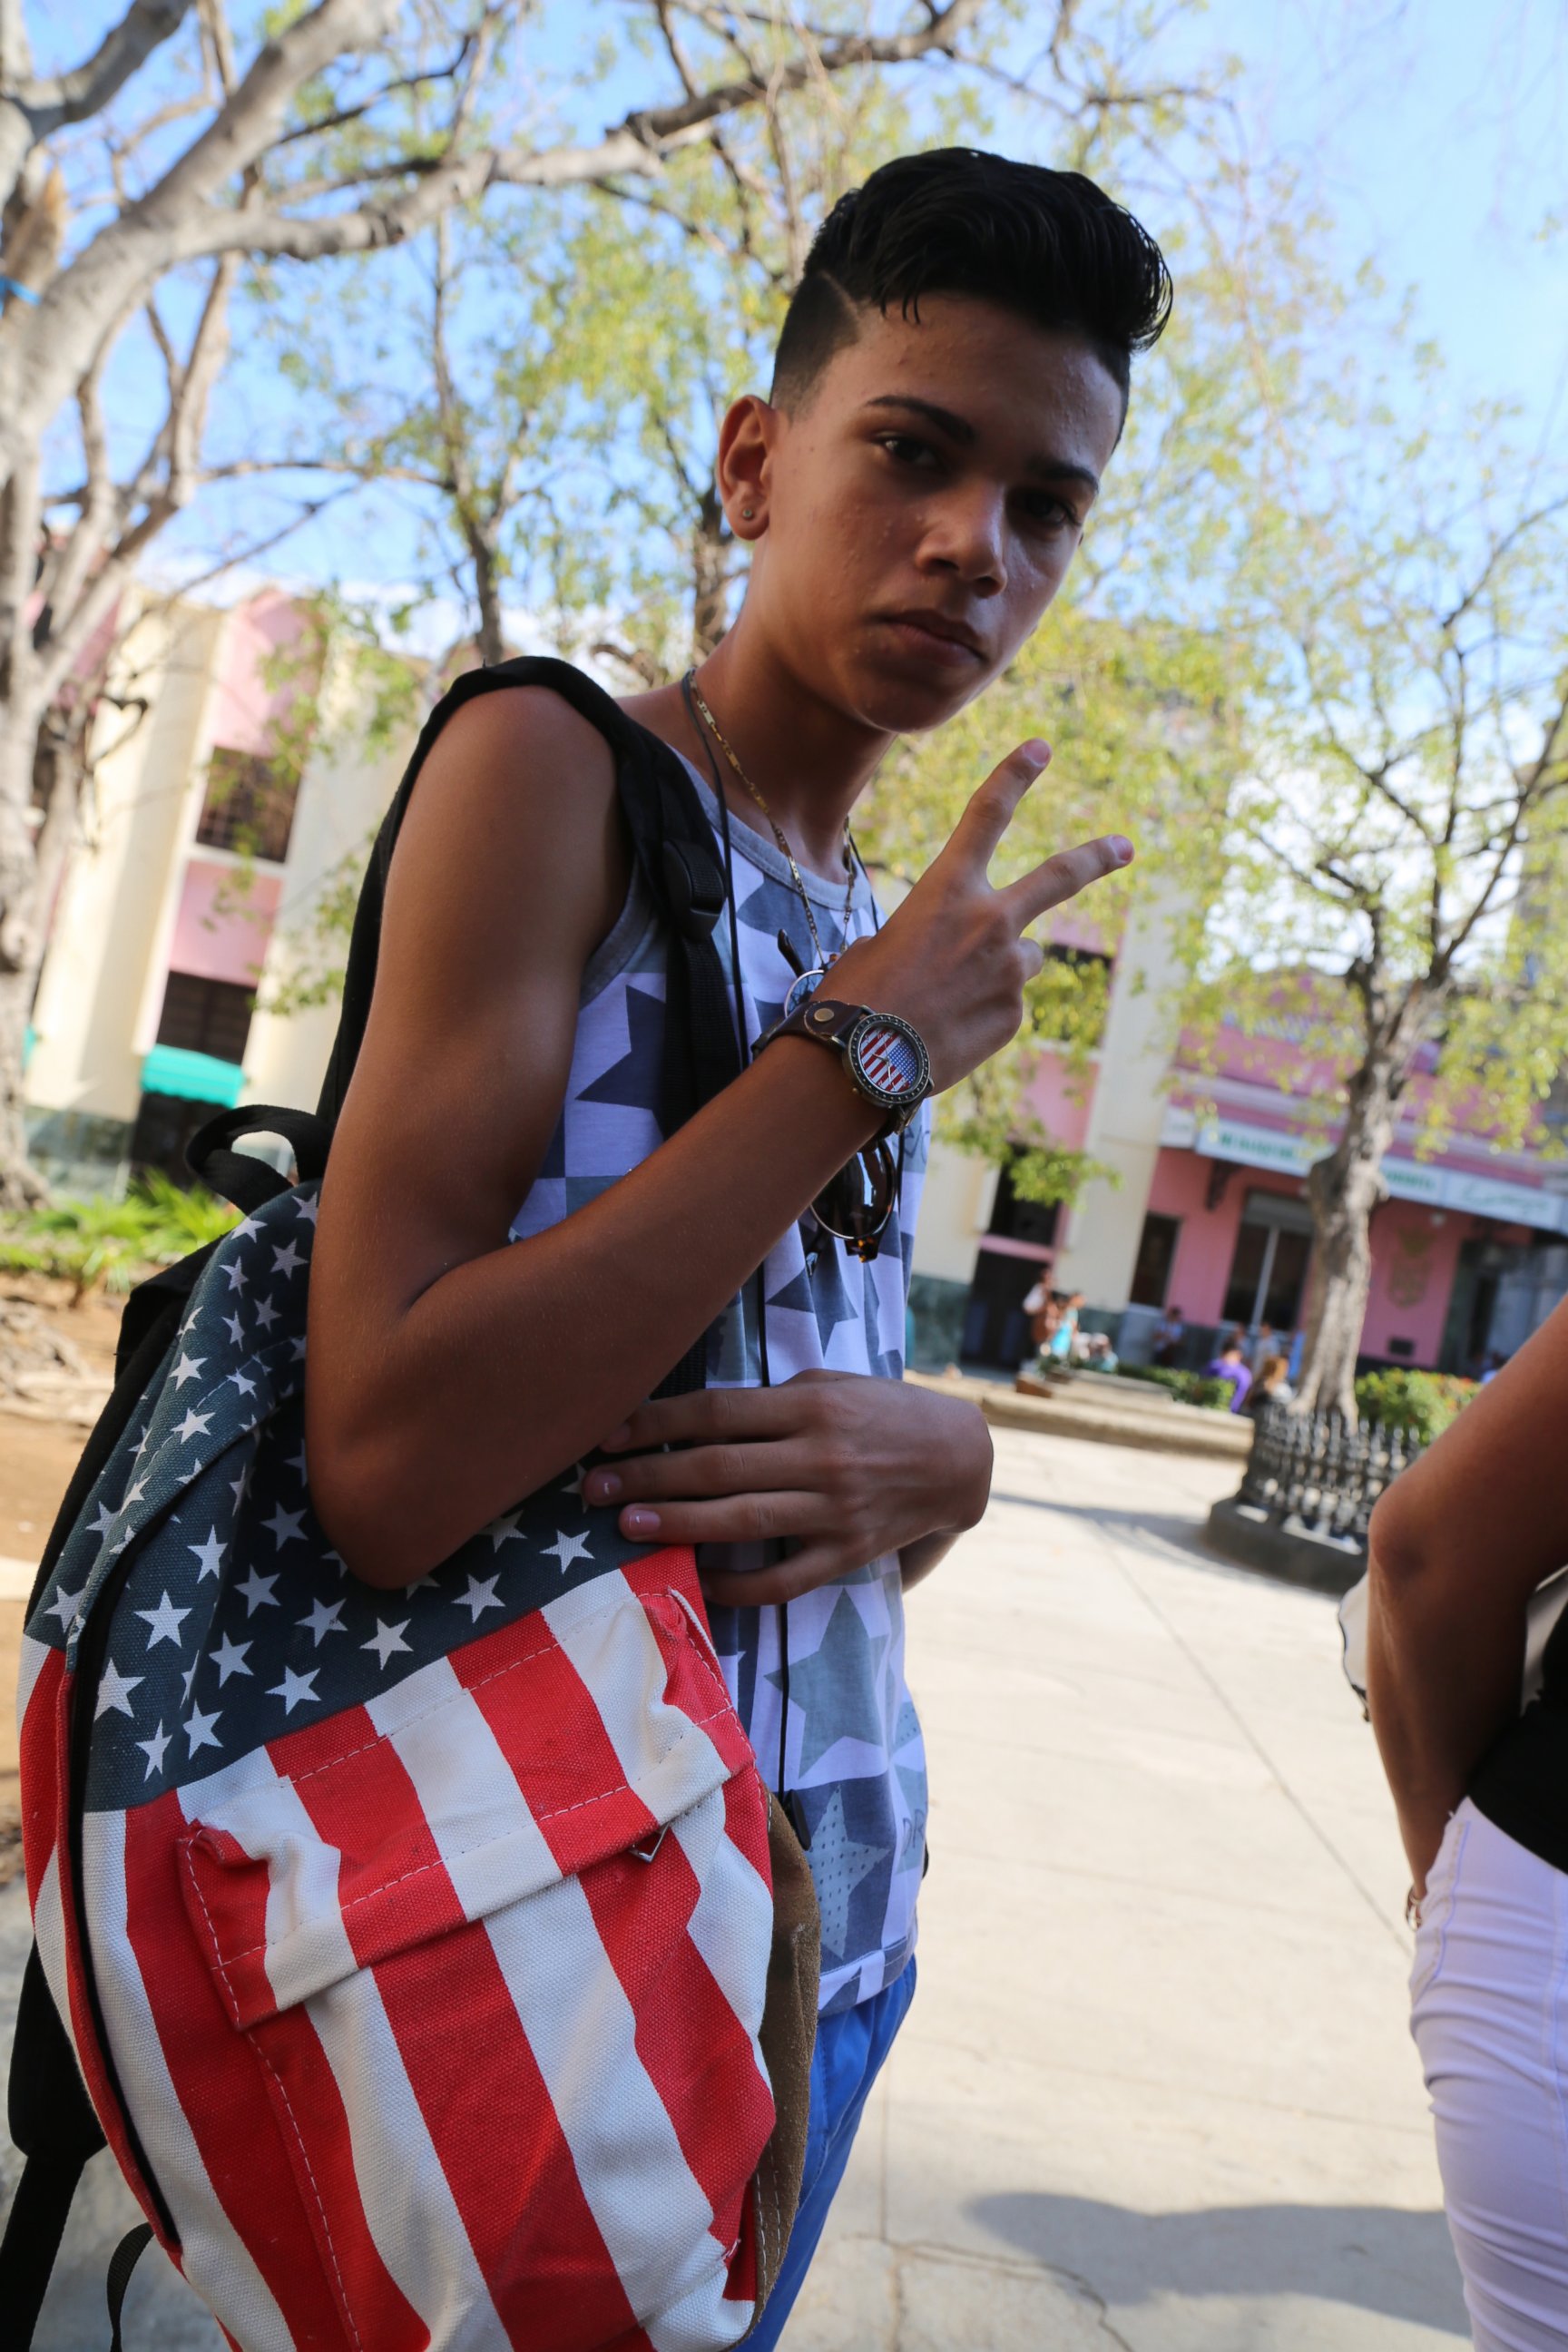 PHOTO: A Cuban youth flaunts his American red, white and blue decorative wear in Cuba on August 12, 2015. 